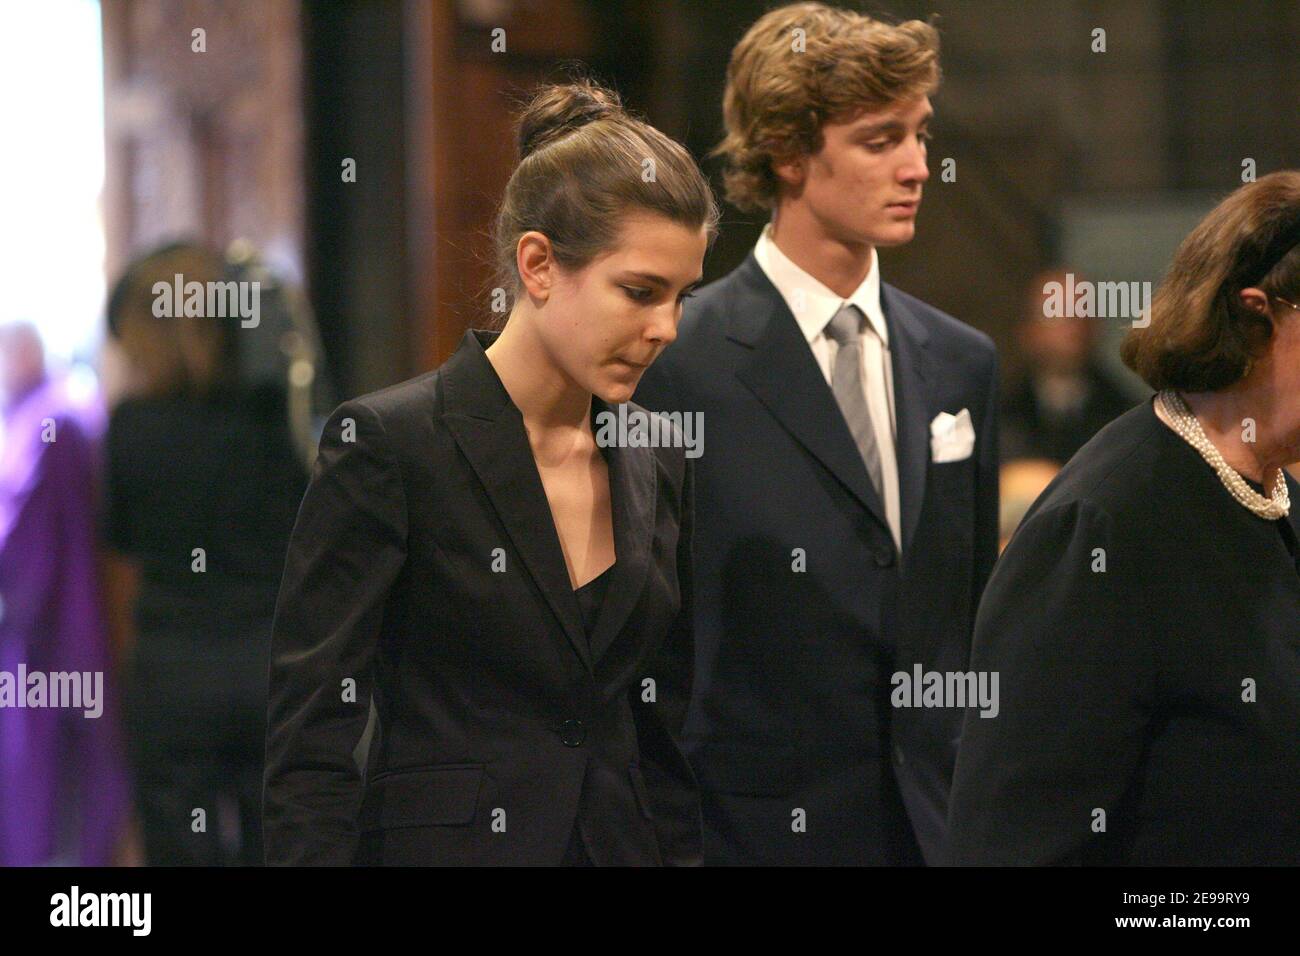 Charlotte and Pierre Casiraghi attend the mass commemorating the first anniversary of Prince Rainier's death in Saint-Nicolas Cathedral, in Monaco on April 6, 2006. Prince Rainier III died on April 6, 2005 after a serious illness, and his only son Prince Albert, succeeded him. Photo by Pool/ABACAPRESS.COM Stock Photo